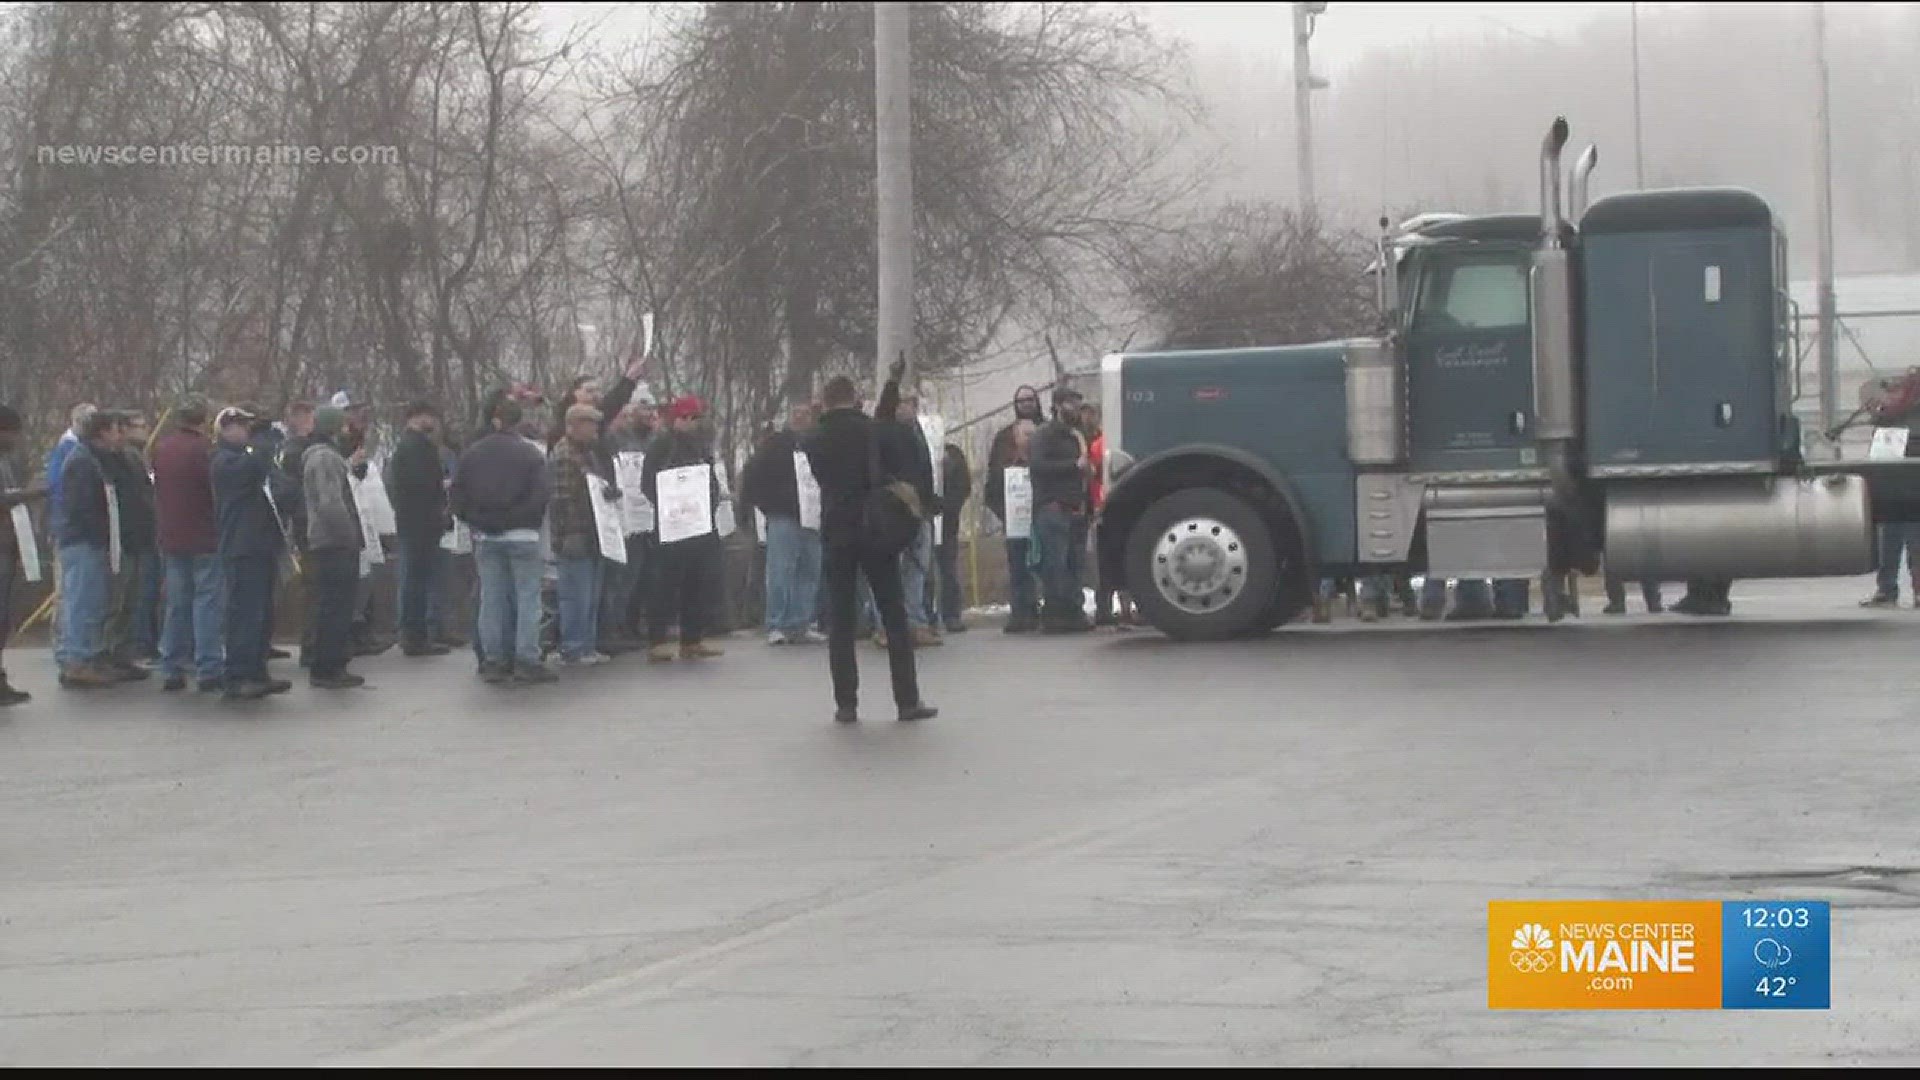 Striking workers at the Hannaford Distribution Center in South Portland are expressing their frustration with contract negotiations